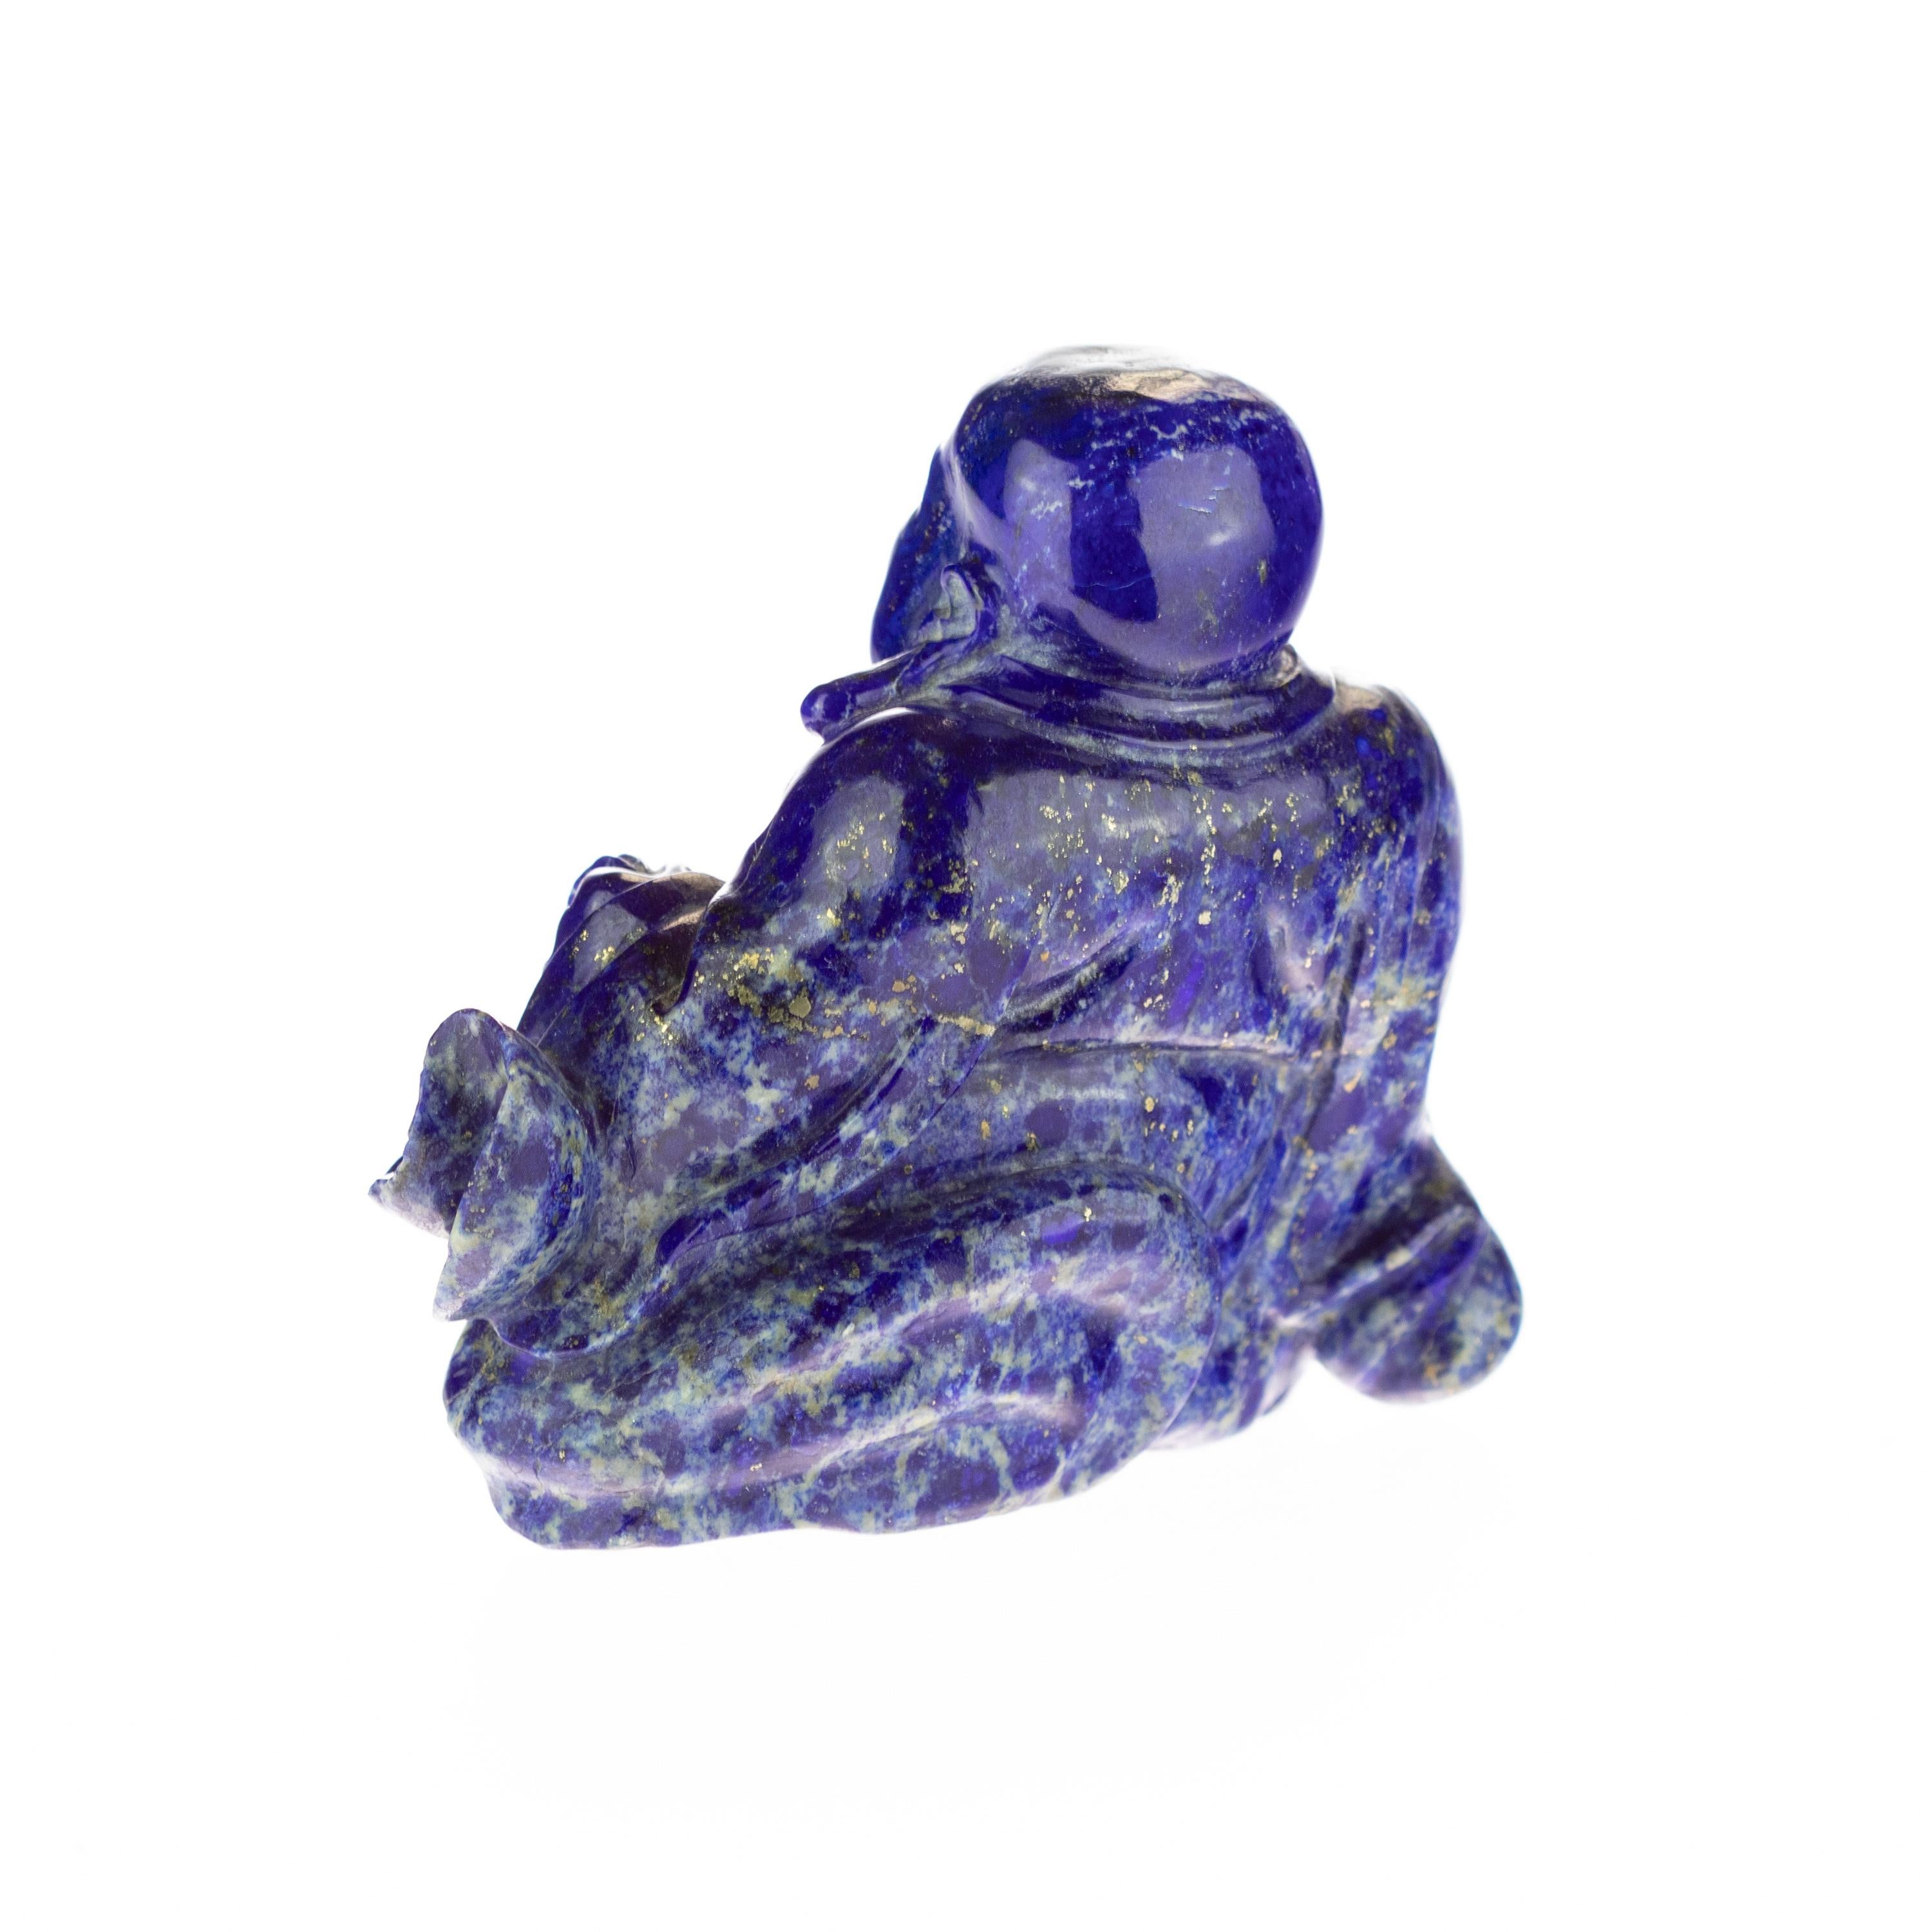 Chinese Export Lapis Lazuli Meditation Buddha Carved Gemstone Asian Art Statue Sculpture For Sale